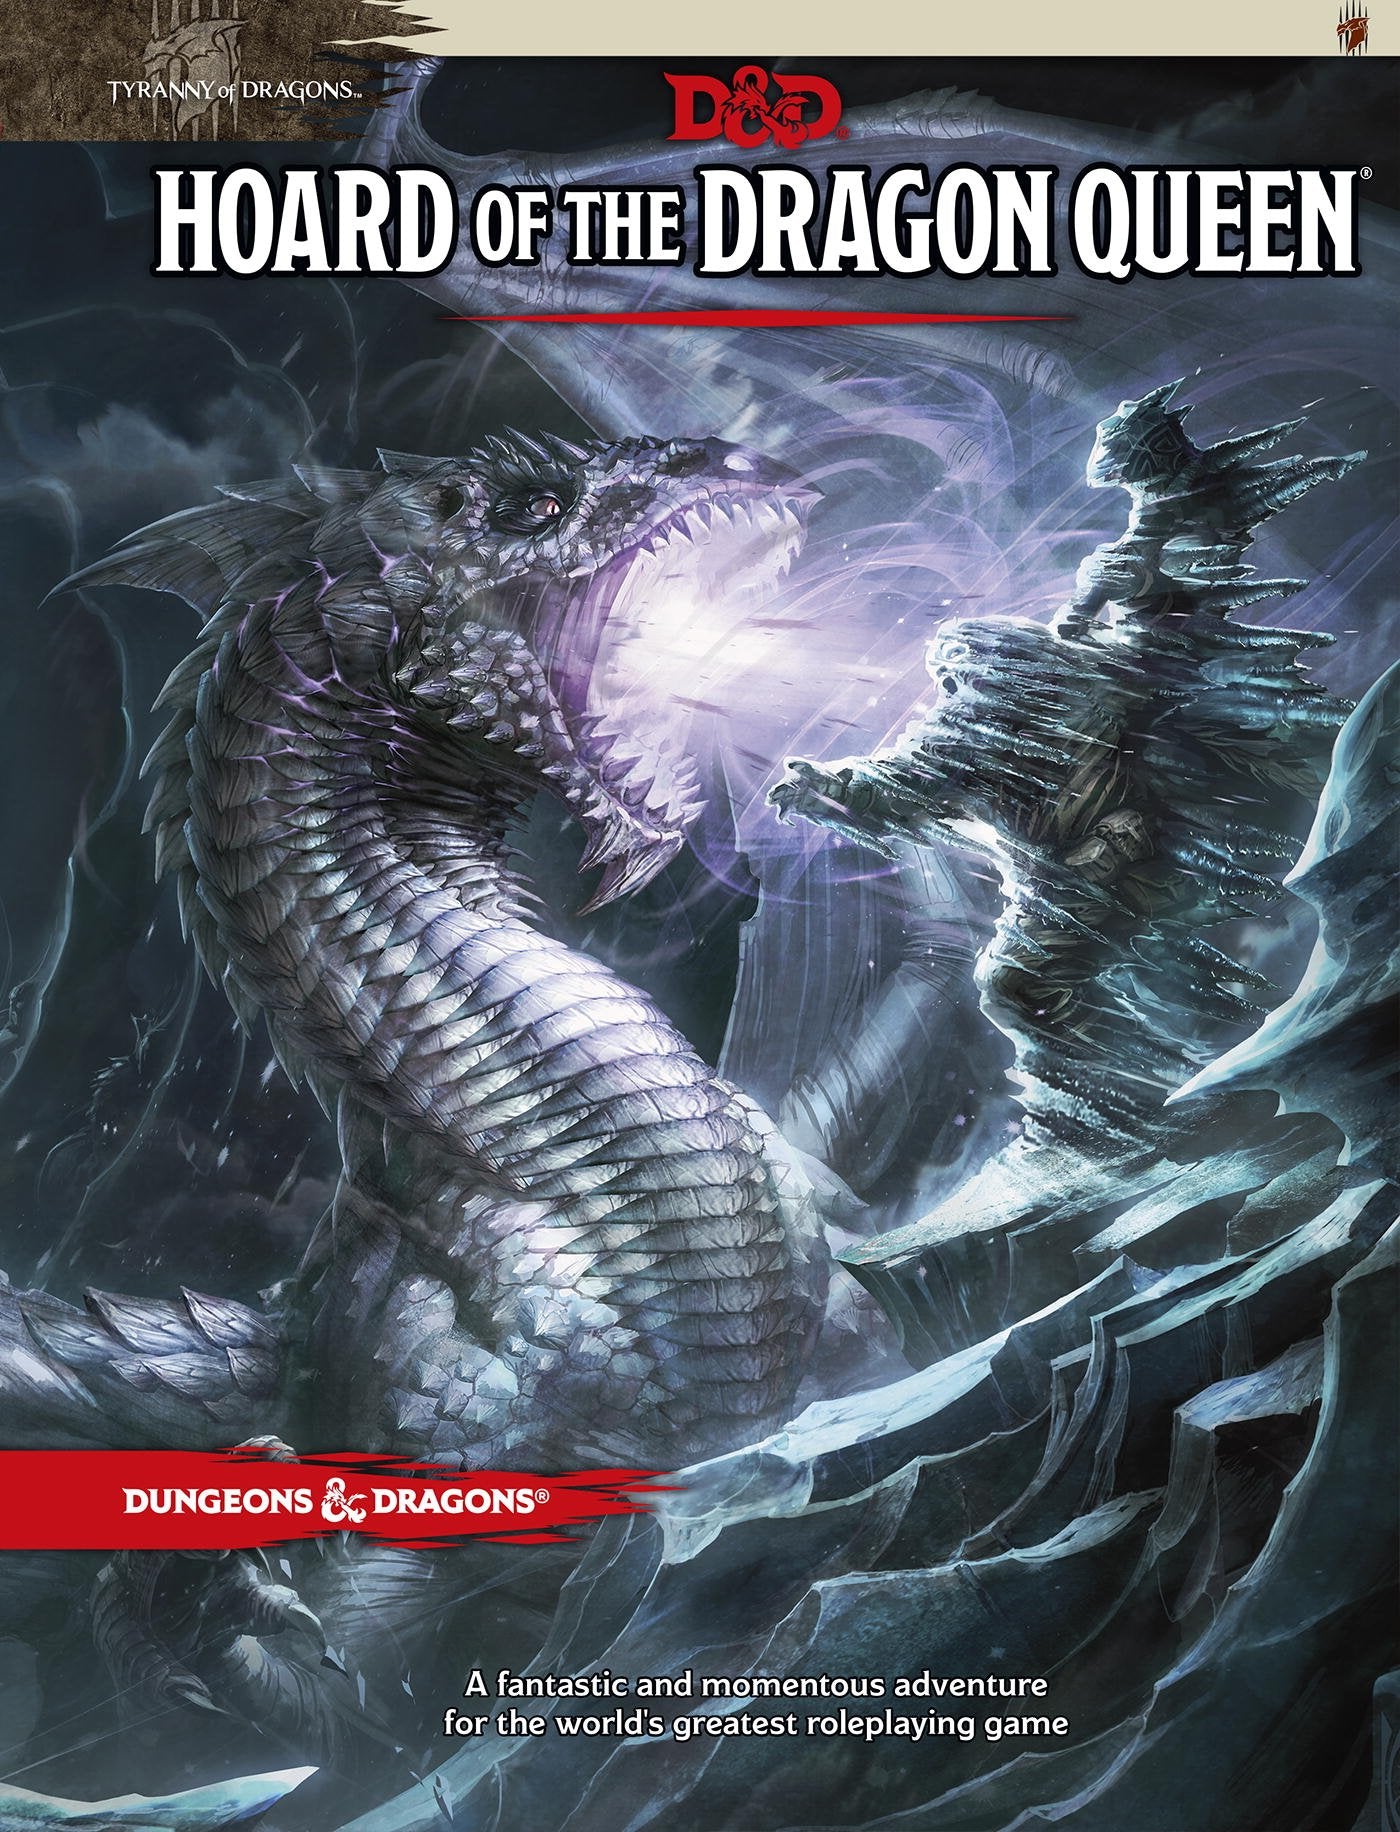 Hoard of the Dragon Queen - Dungeons & Dragons - 5E